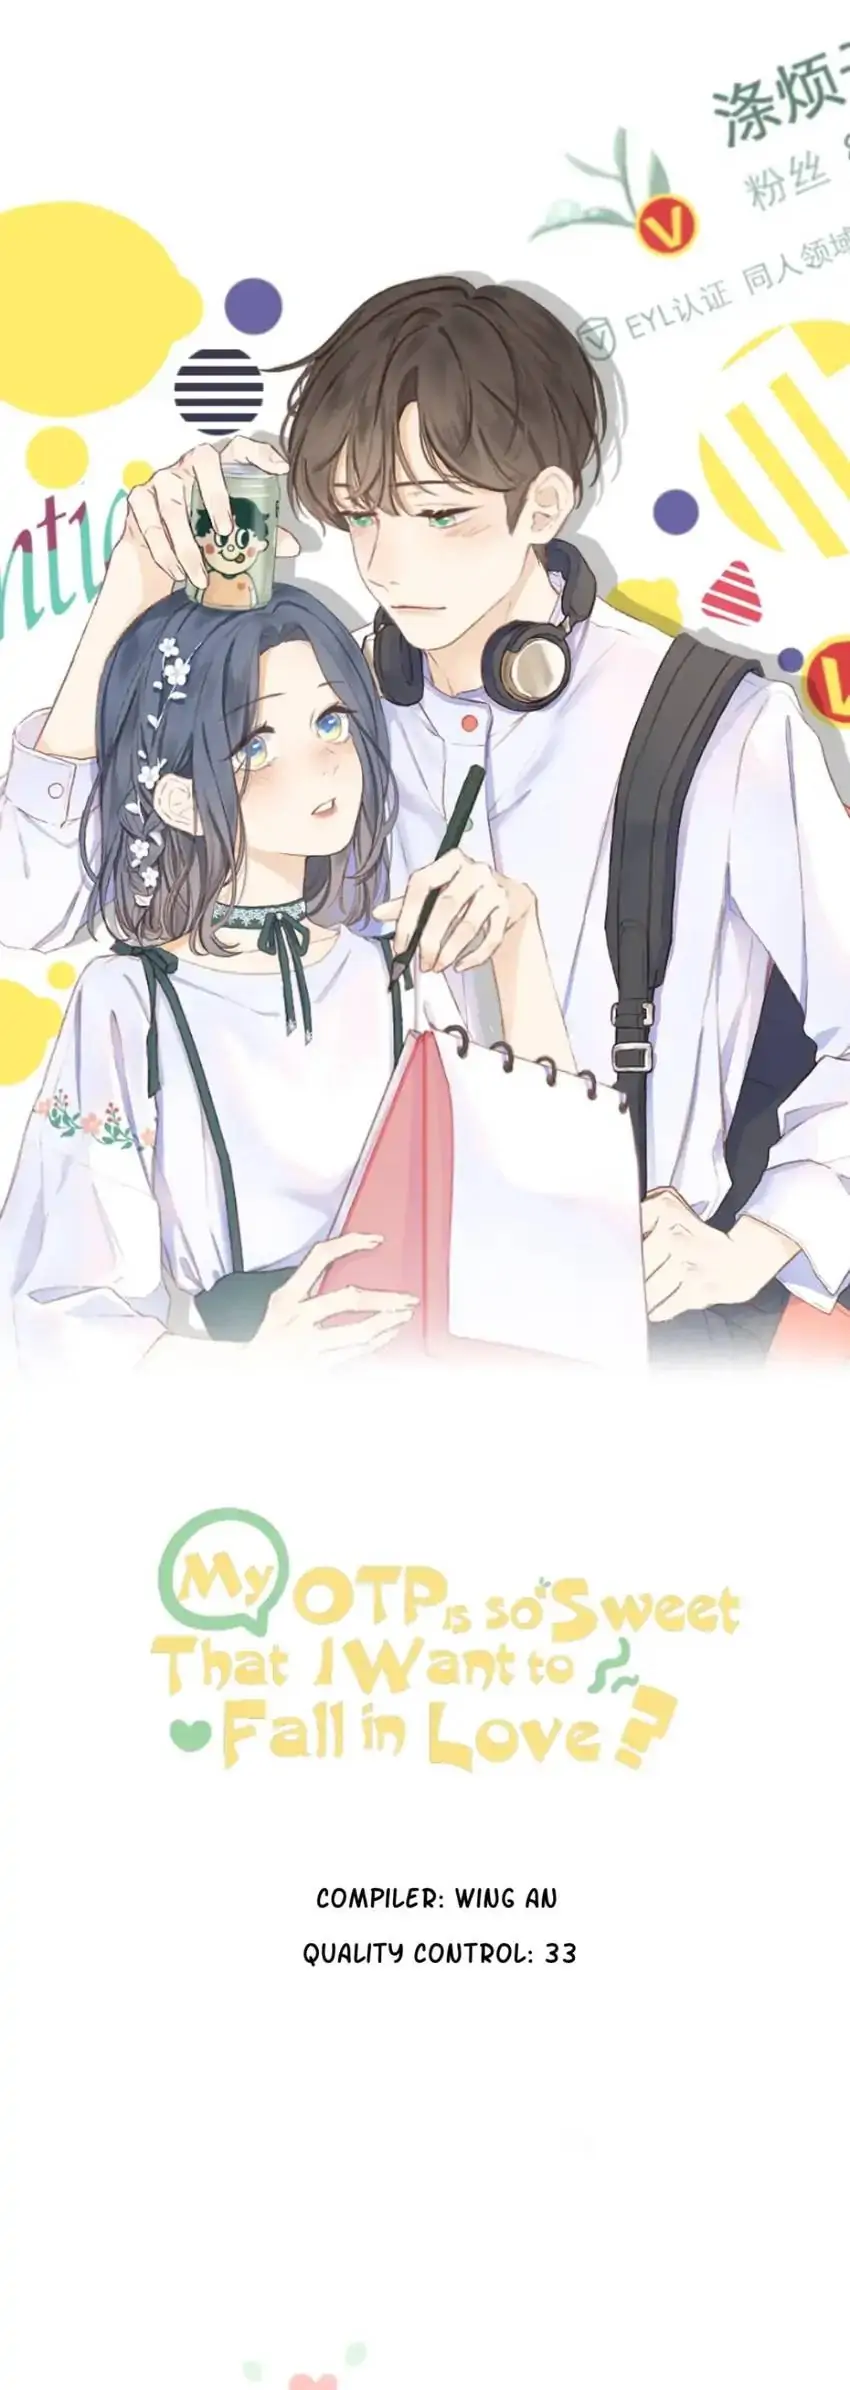 My OTP Is So Sweet That I Want to Have a Love Affair - chapter 76 - #2